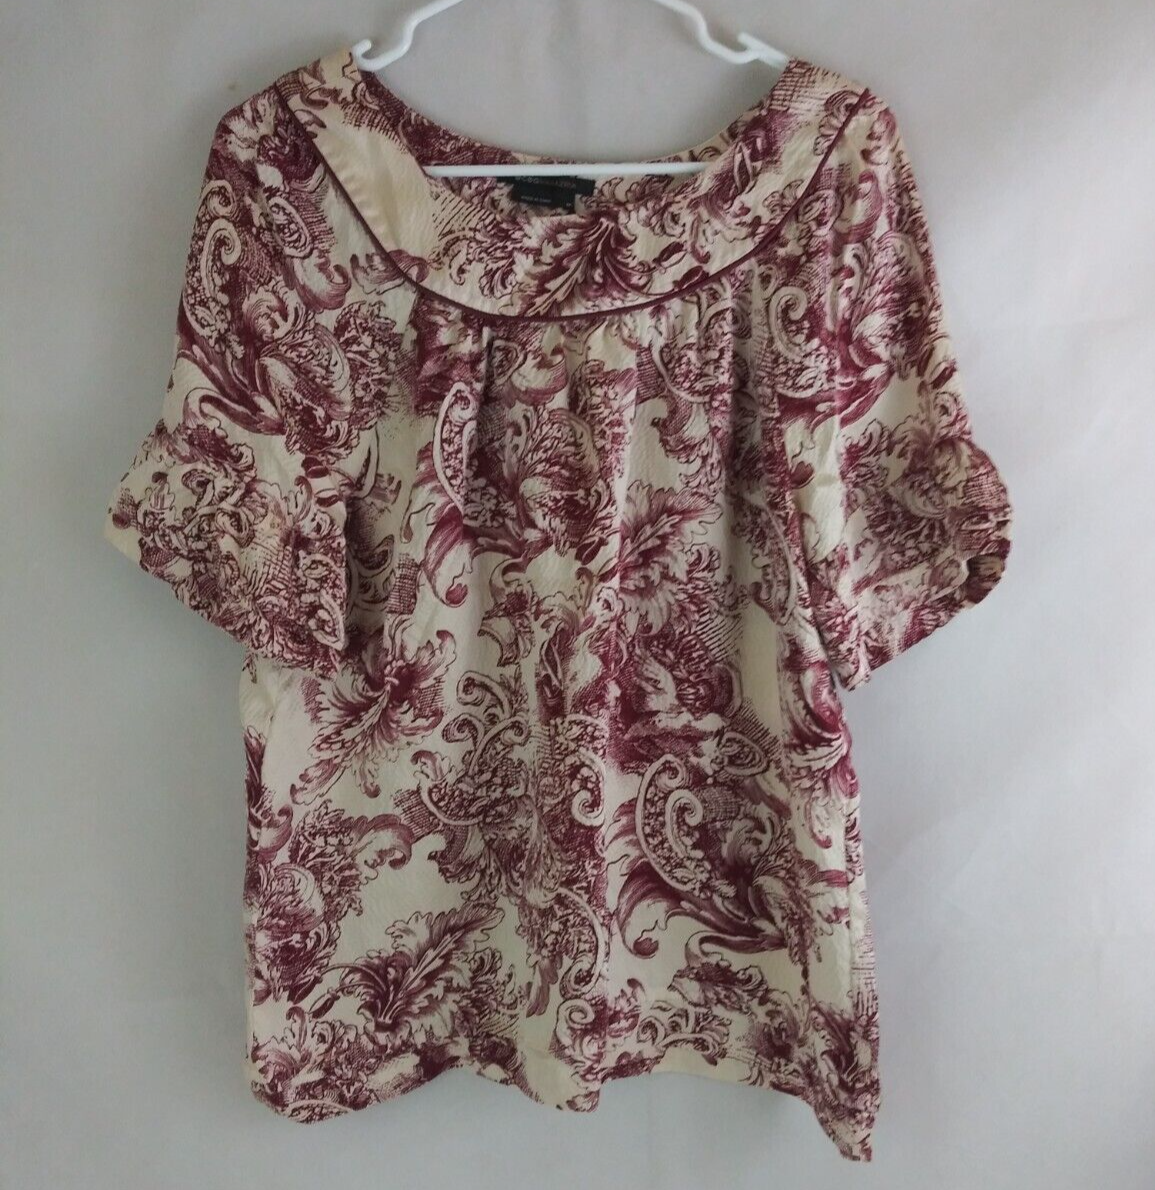 Primary image for BCBG Maxazria Women's Blouse With Floral Paisley Designs Size Medium 100% Silk